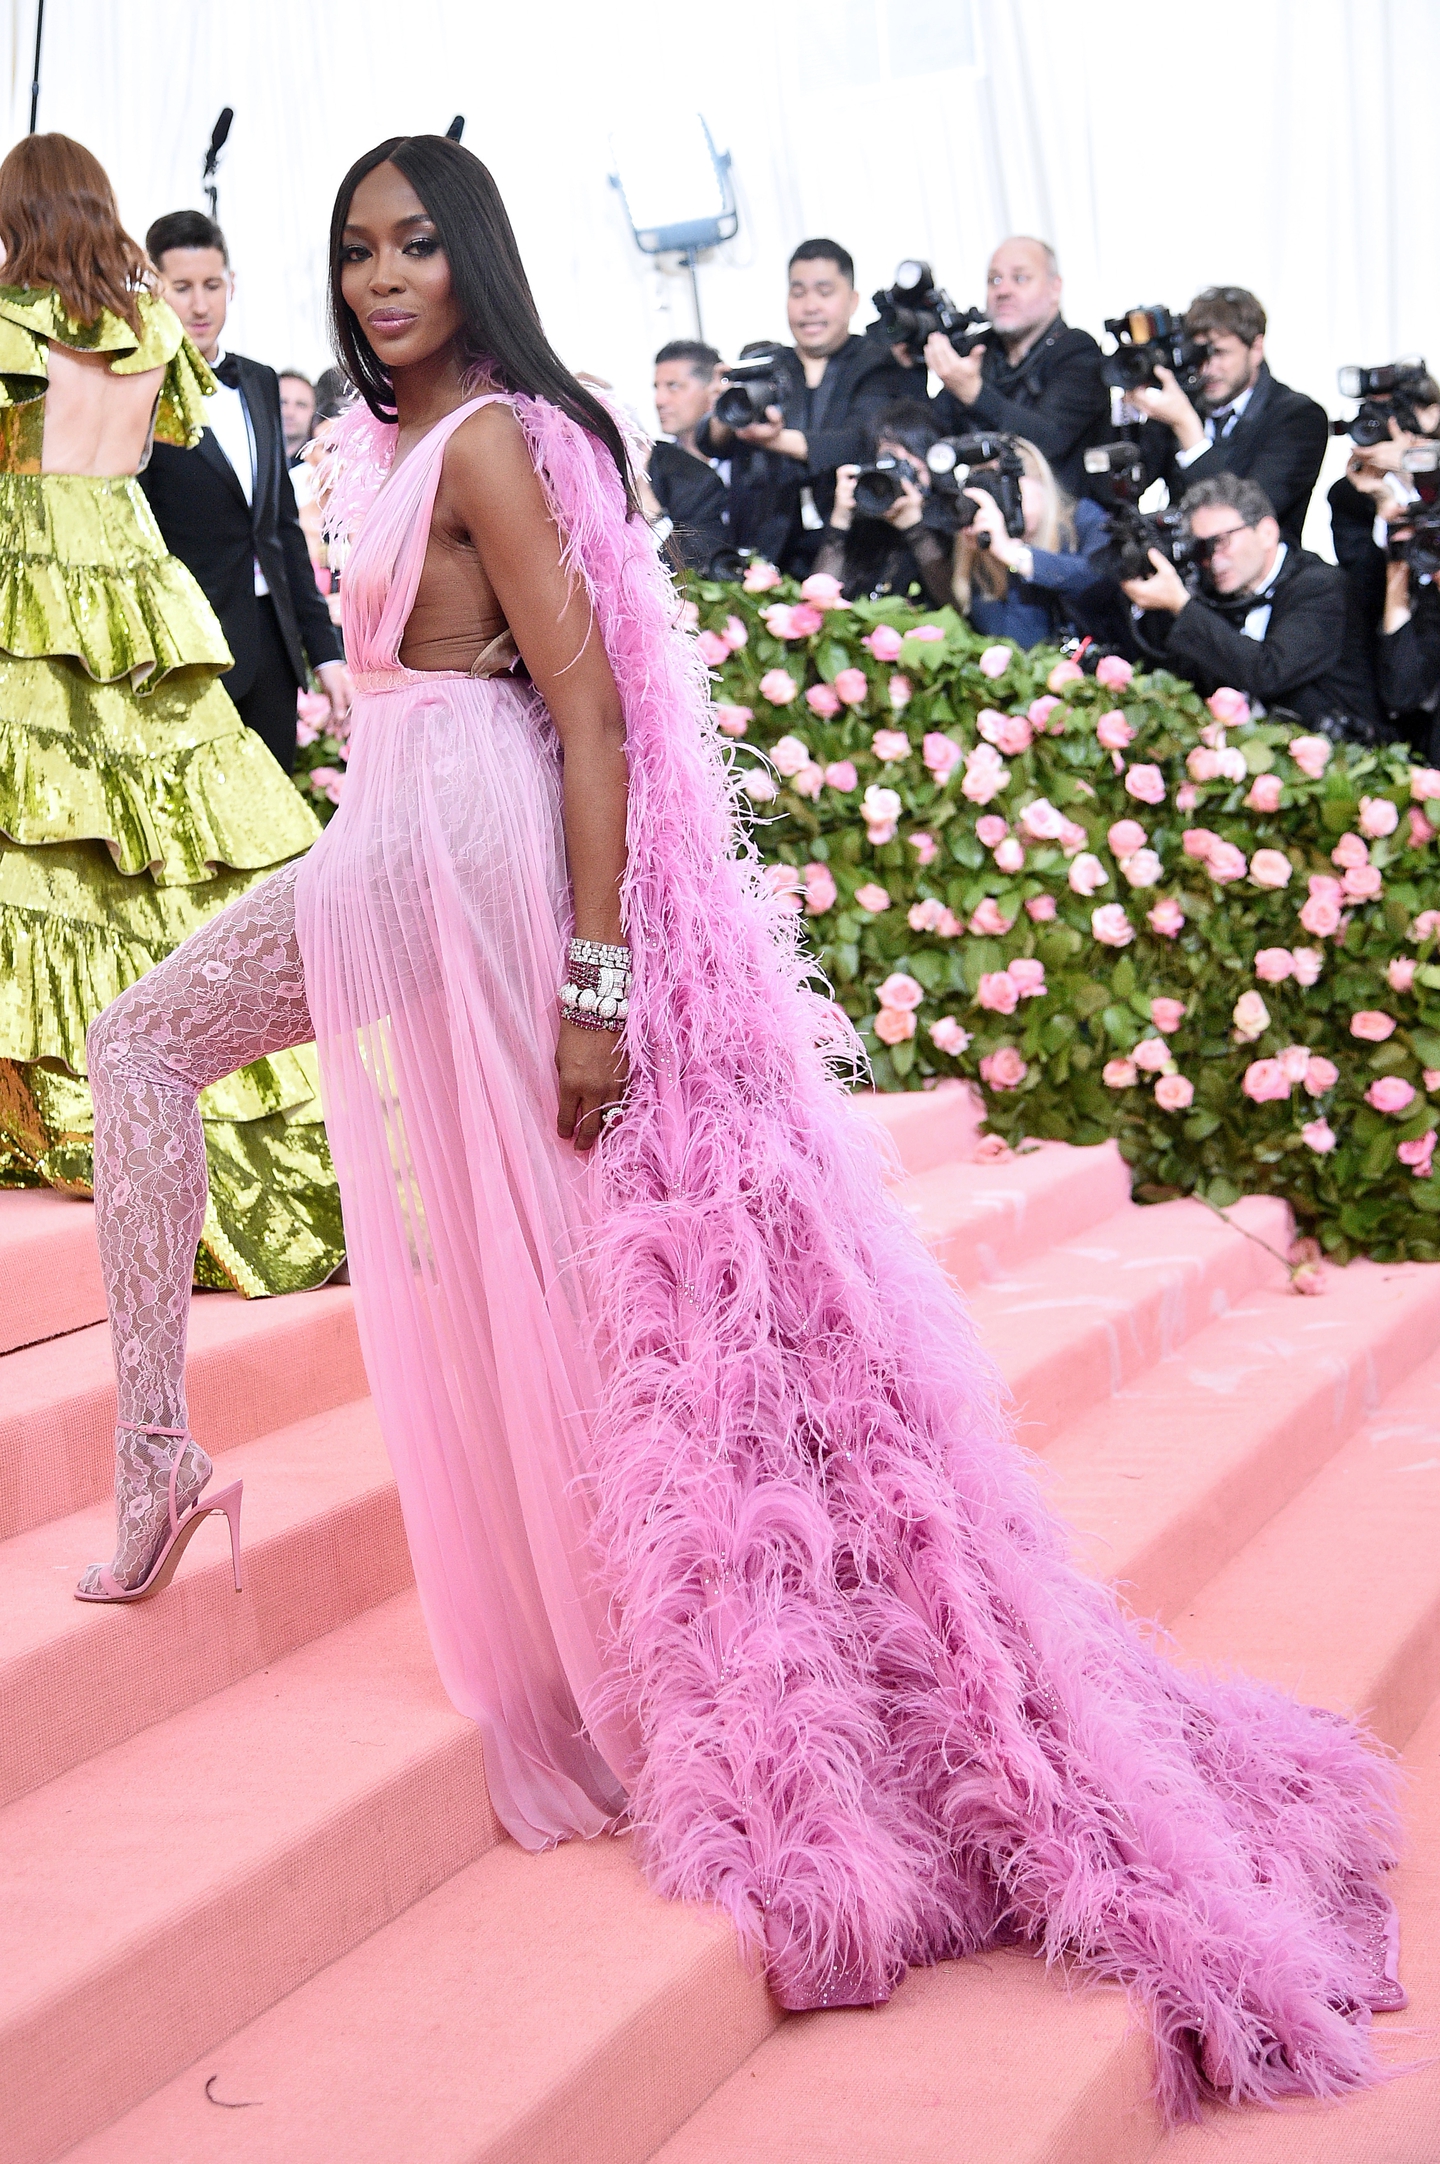 Met Gala 2019 Red Carpet: See All the Celebrity Dresses, Outfits, and Looks  Here